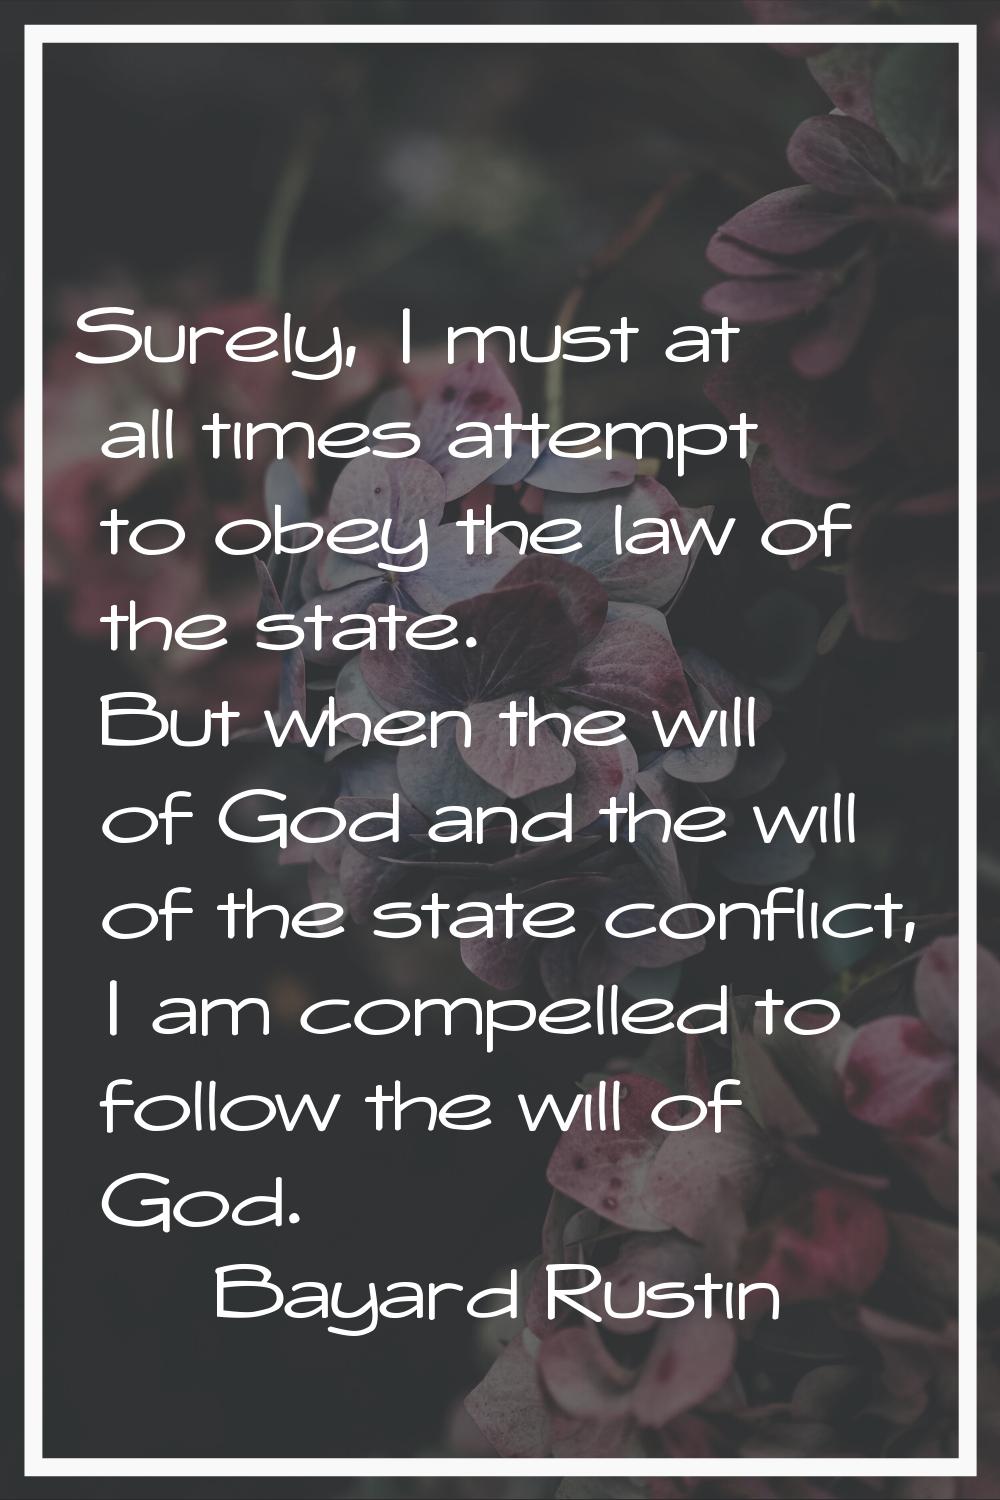 Surely, I must at all times attempt to obey the law of the state. But when the will of God and the 